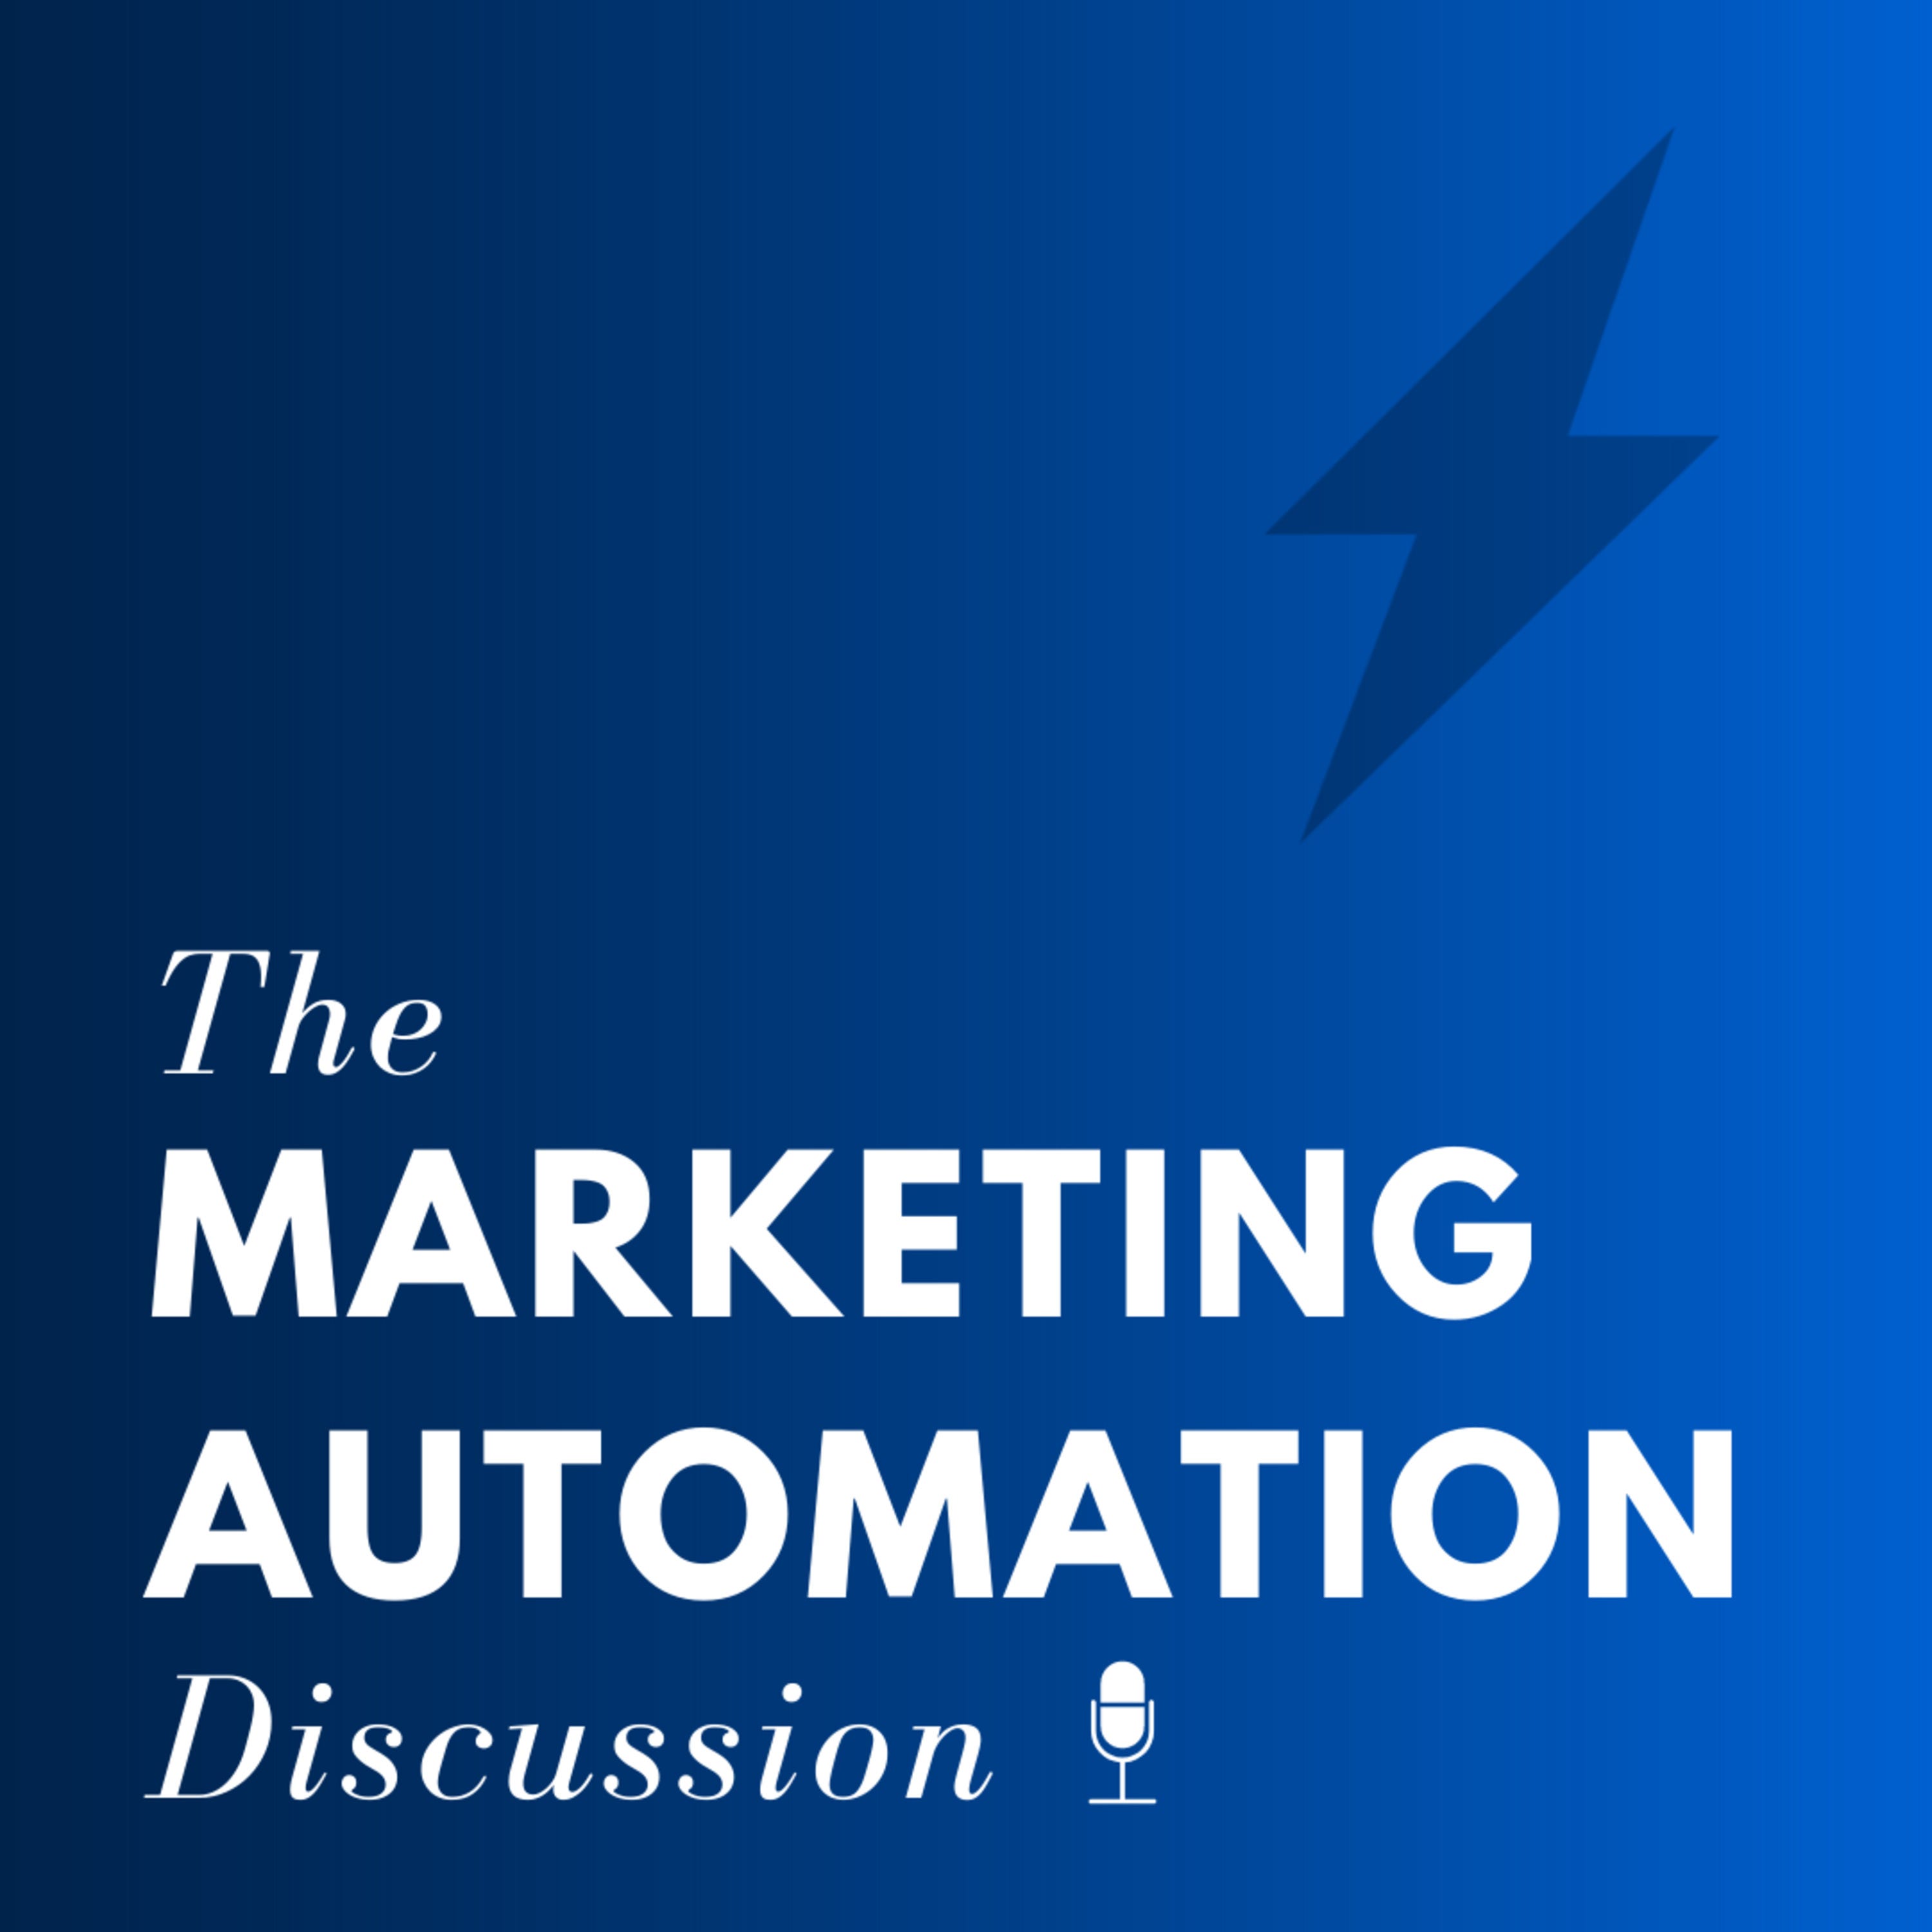 Applying Business Process Engineering to Marketing Automation with Sam Ovett